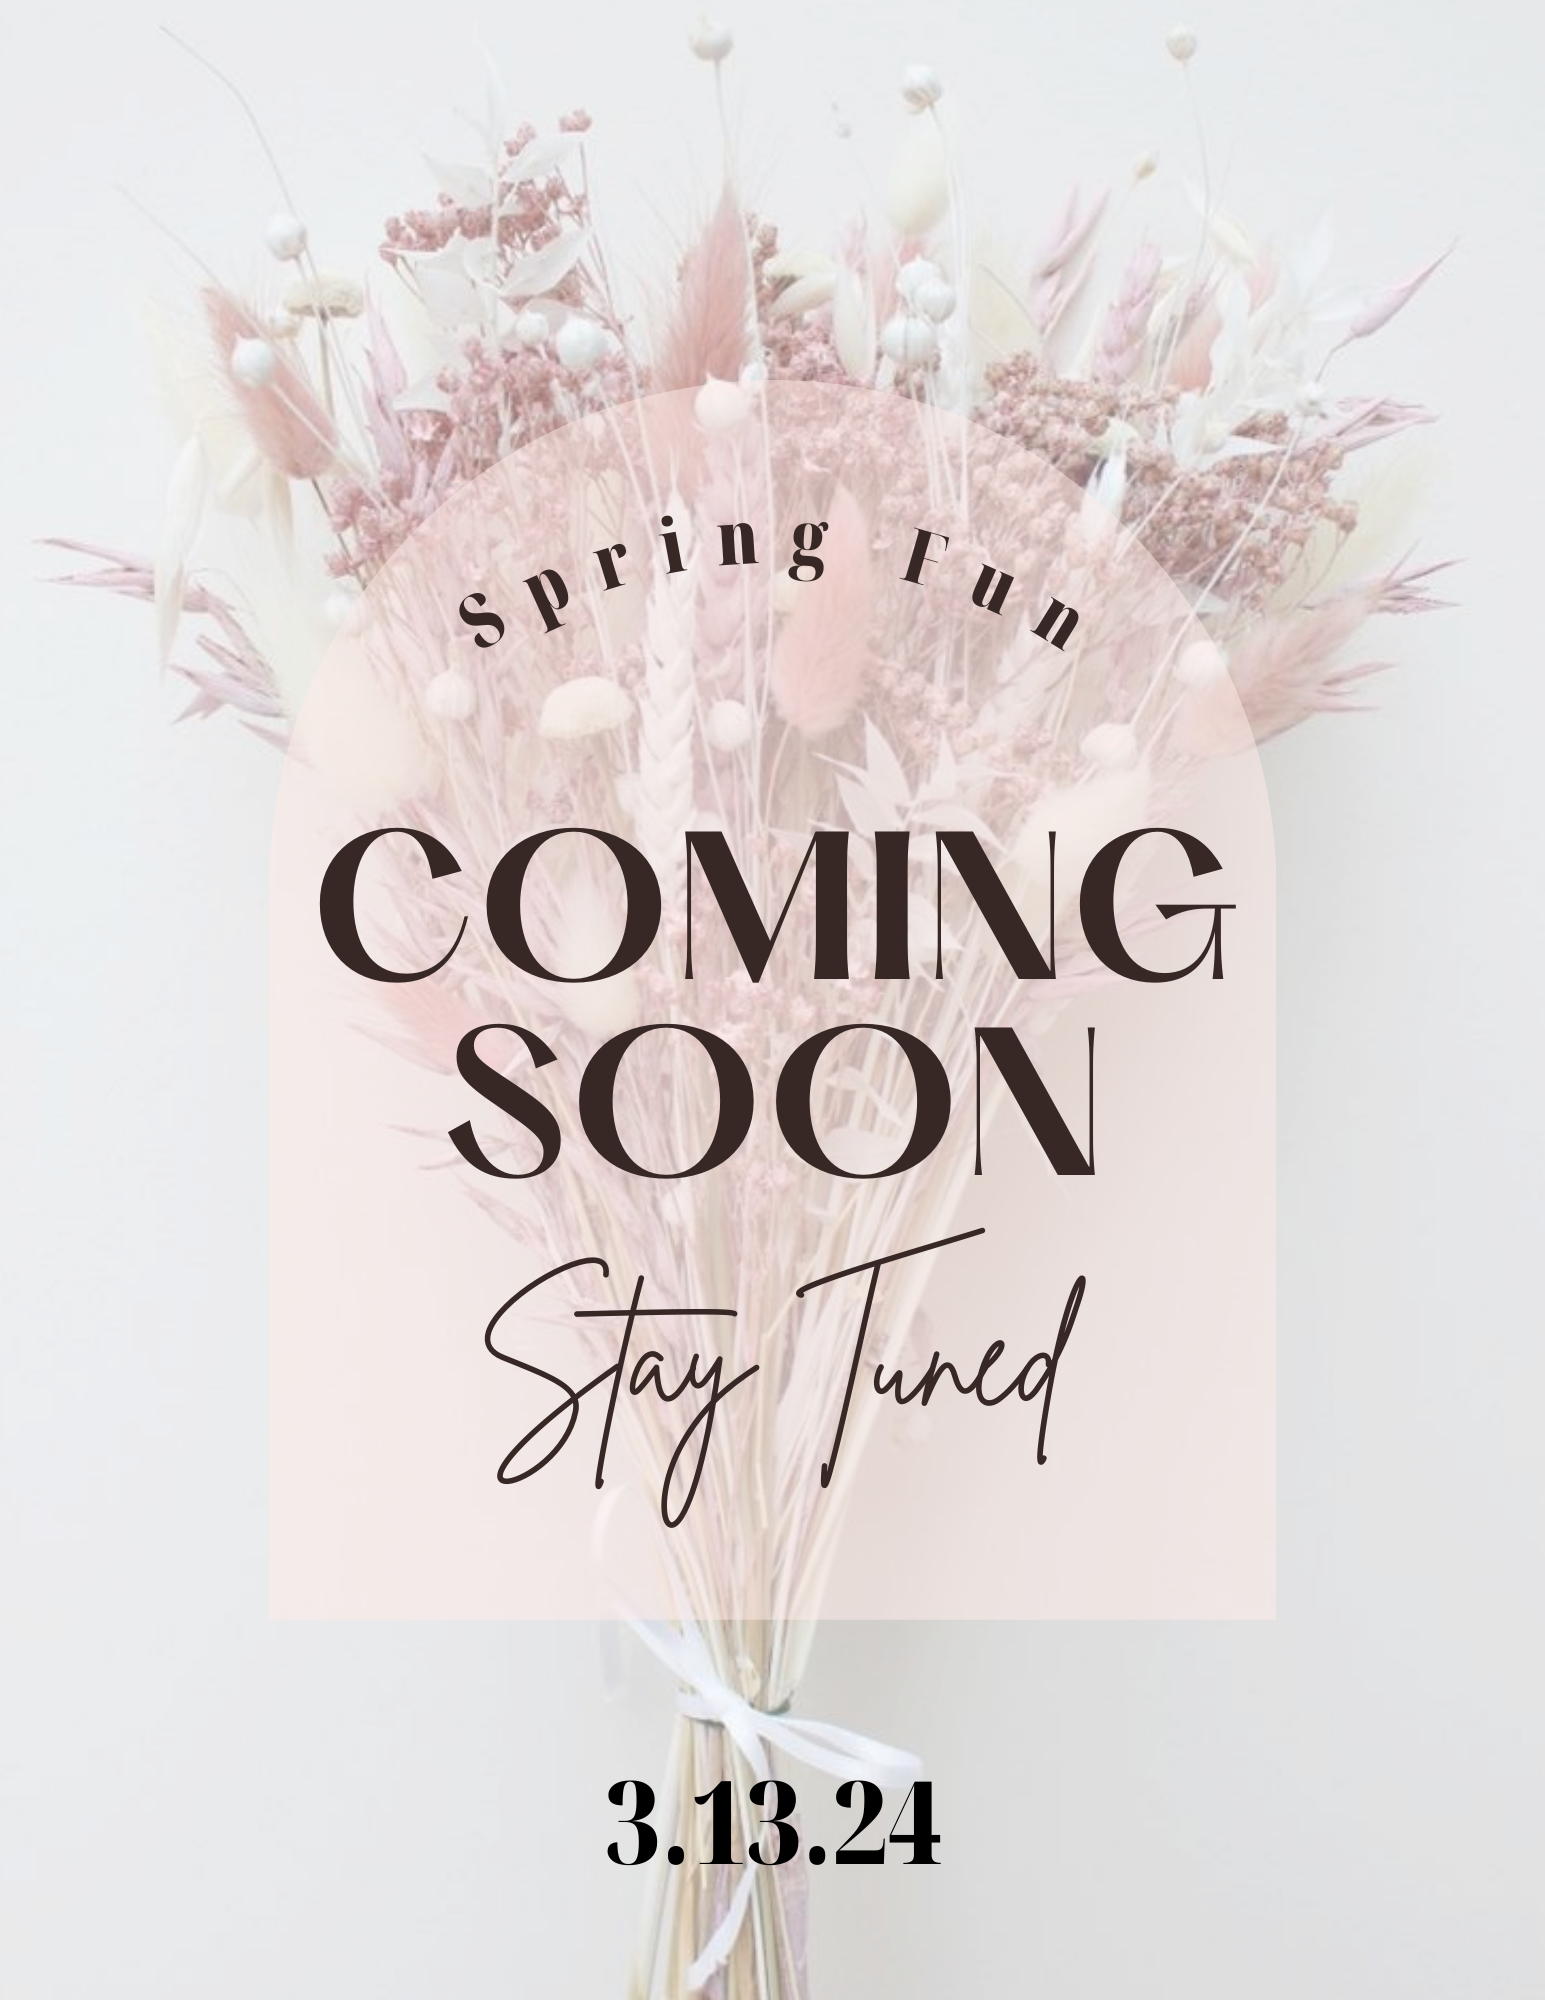 text announcing something coming soon on 3.13.24 on a background of dusty pink florals